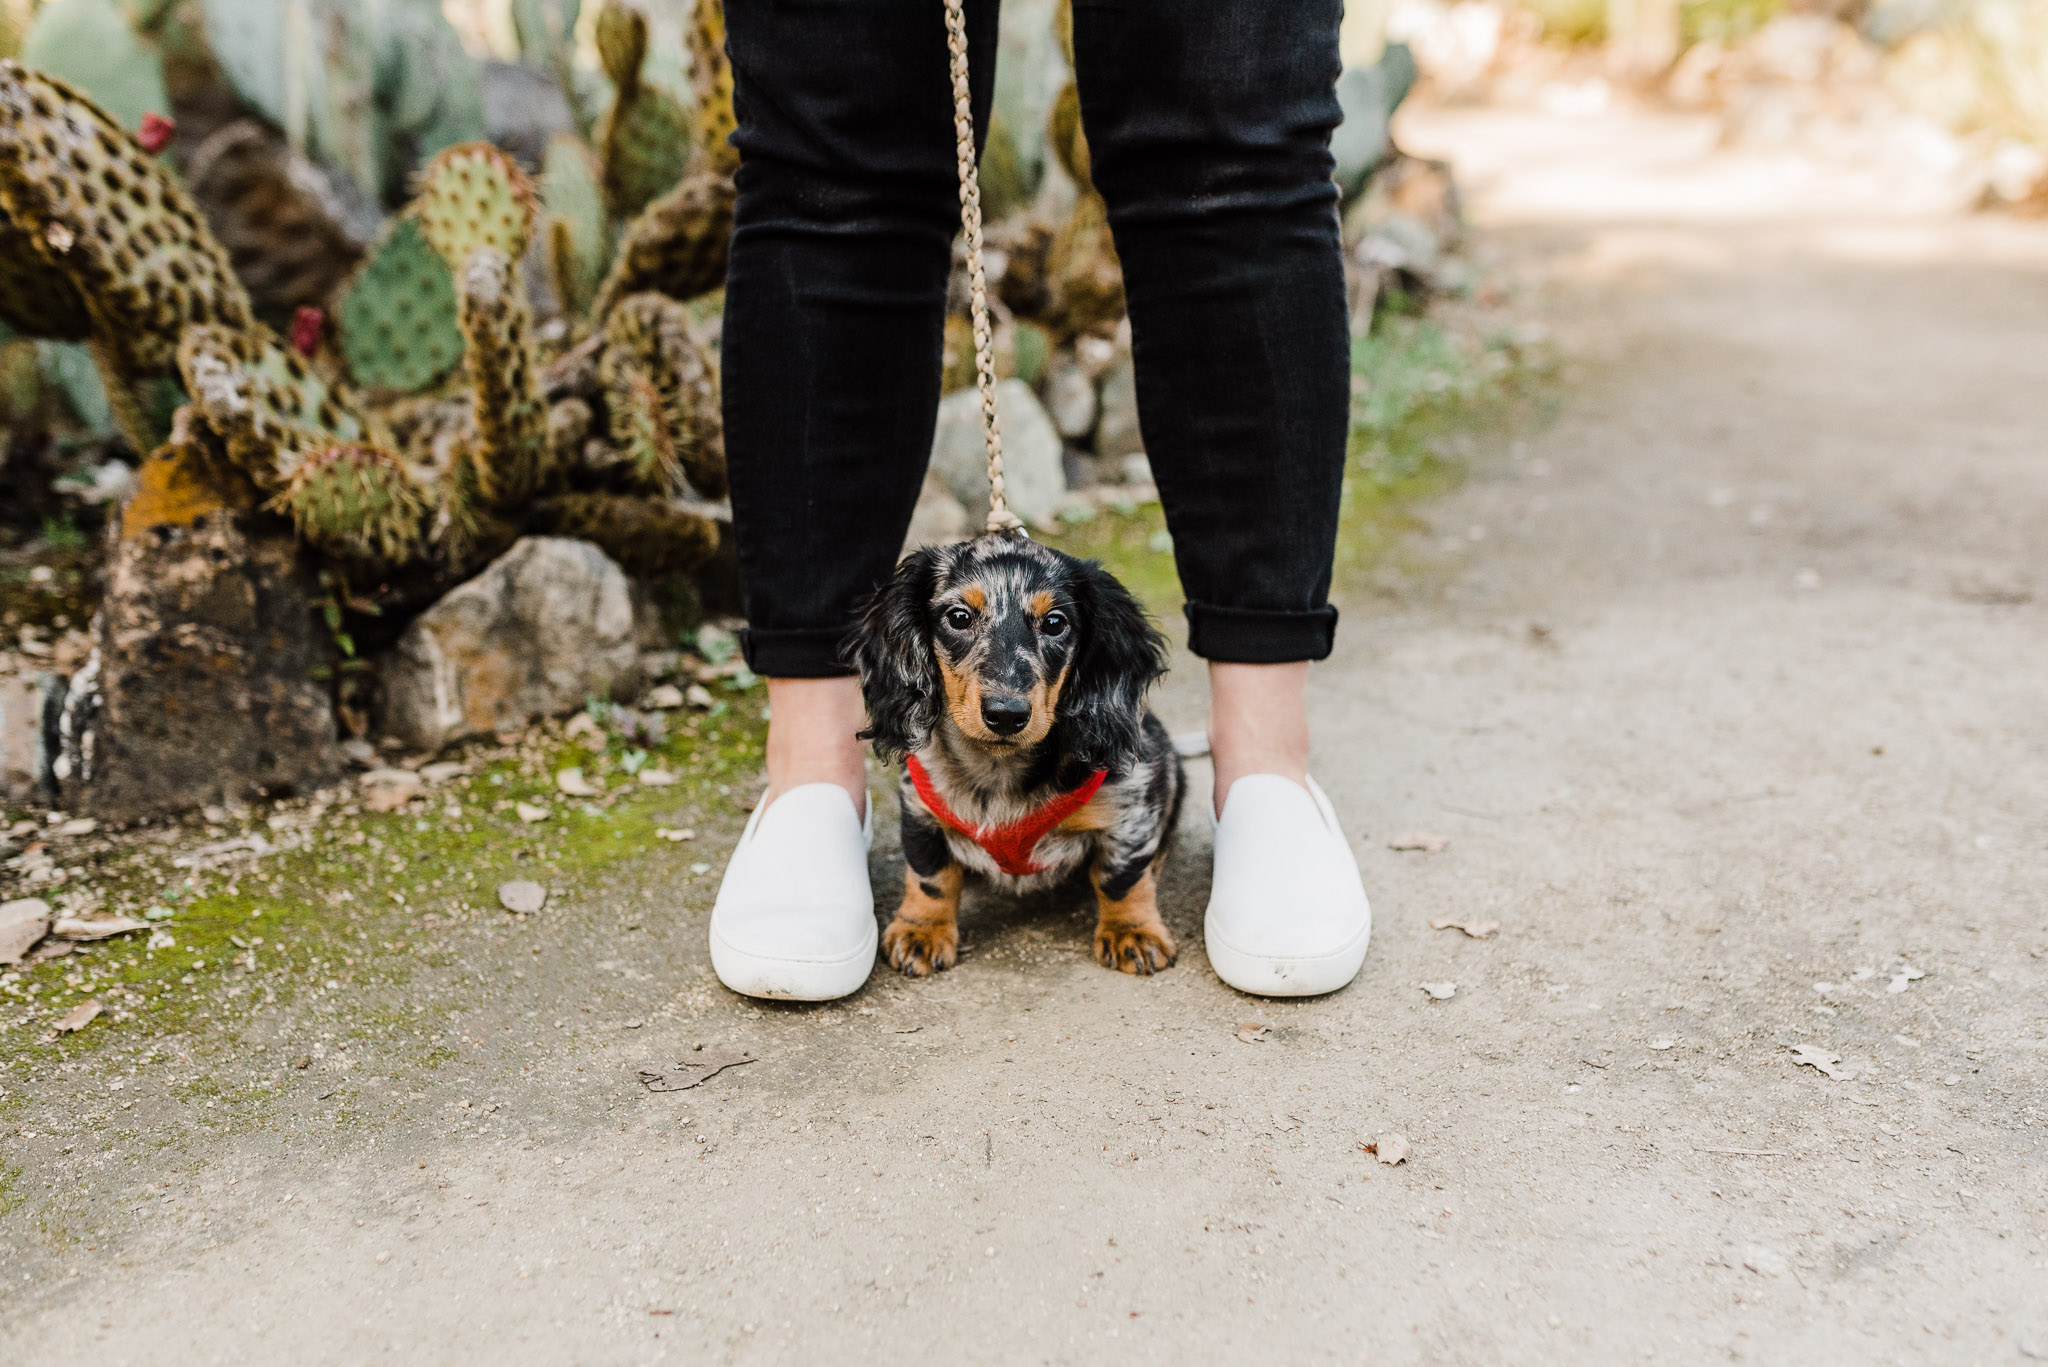 Long haired Dachshund (wiener dog) standing between his owner's legs